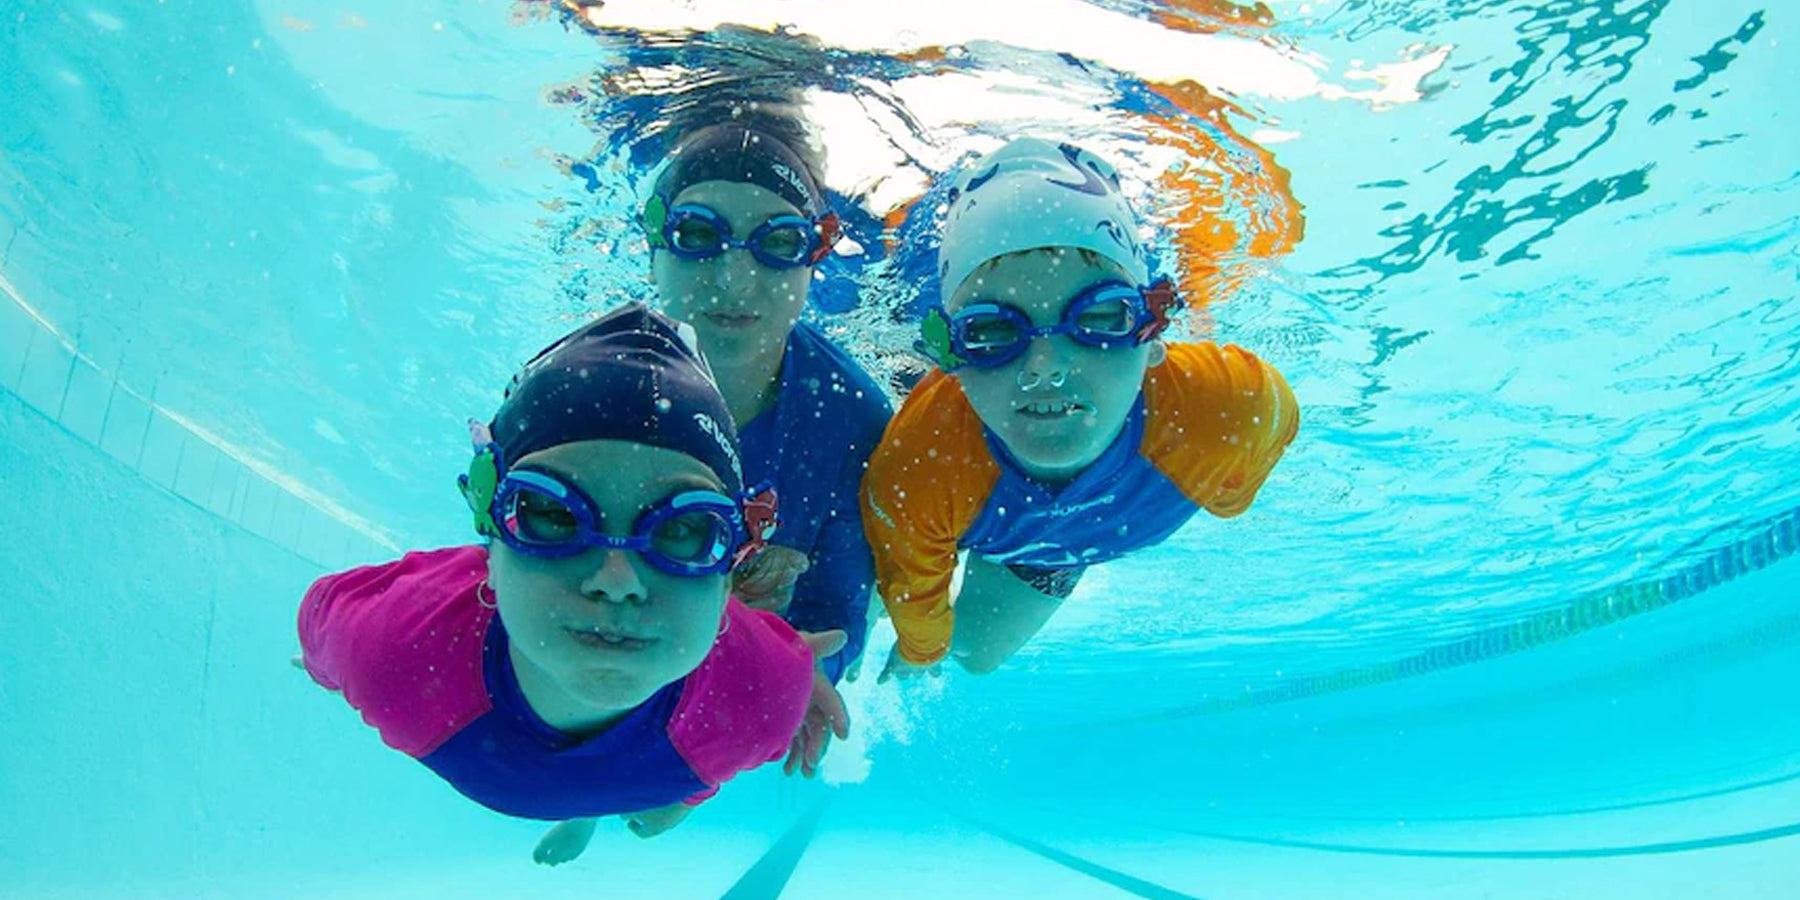 Swimming experts are worried about a spike in drownings. Here's their advice for staying safe